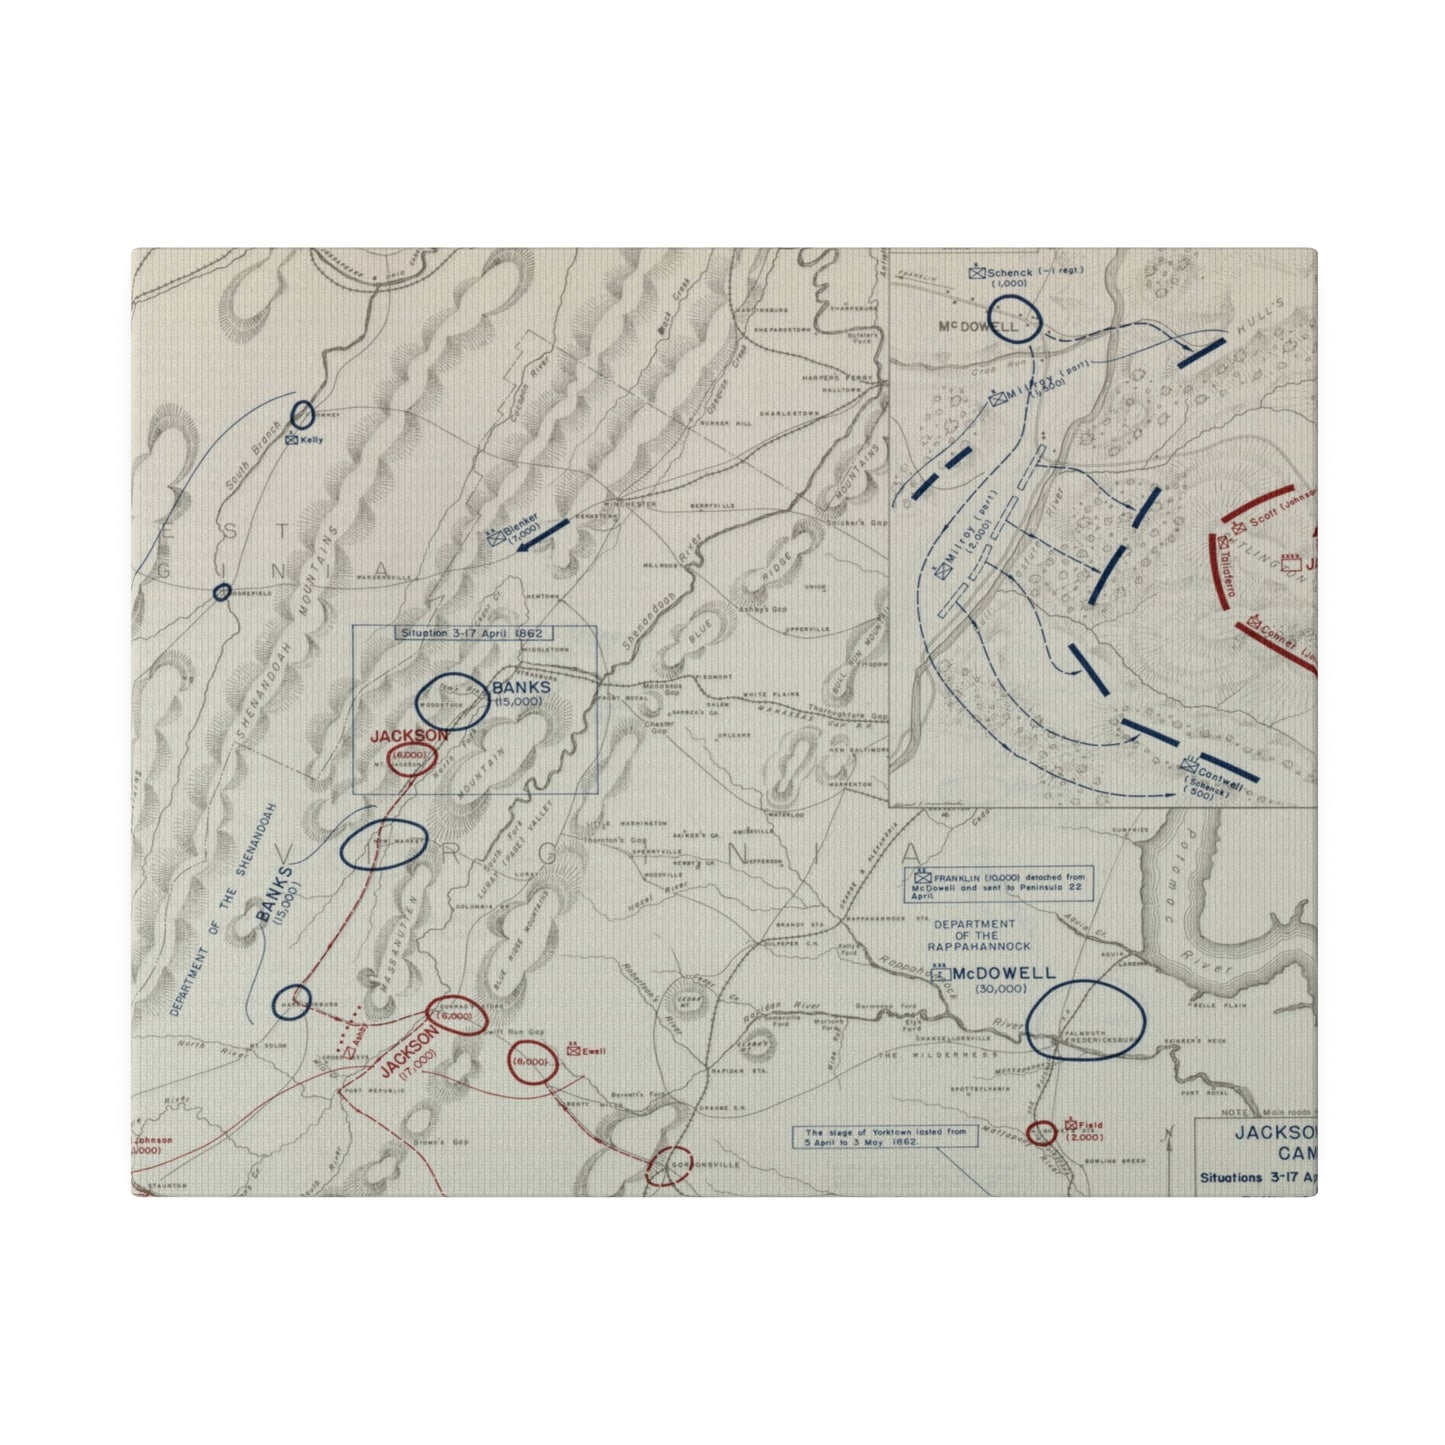 American Civil War Jackson's Valley Campaign - Situation 3-17, 29 Apr and Battle of McDowell 8 May 1862